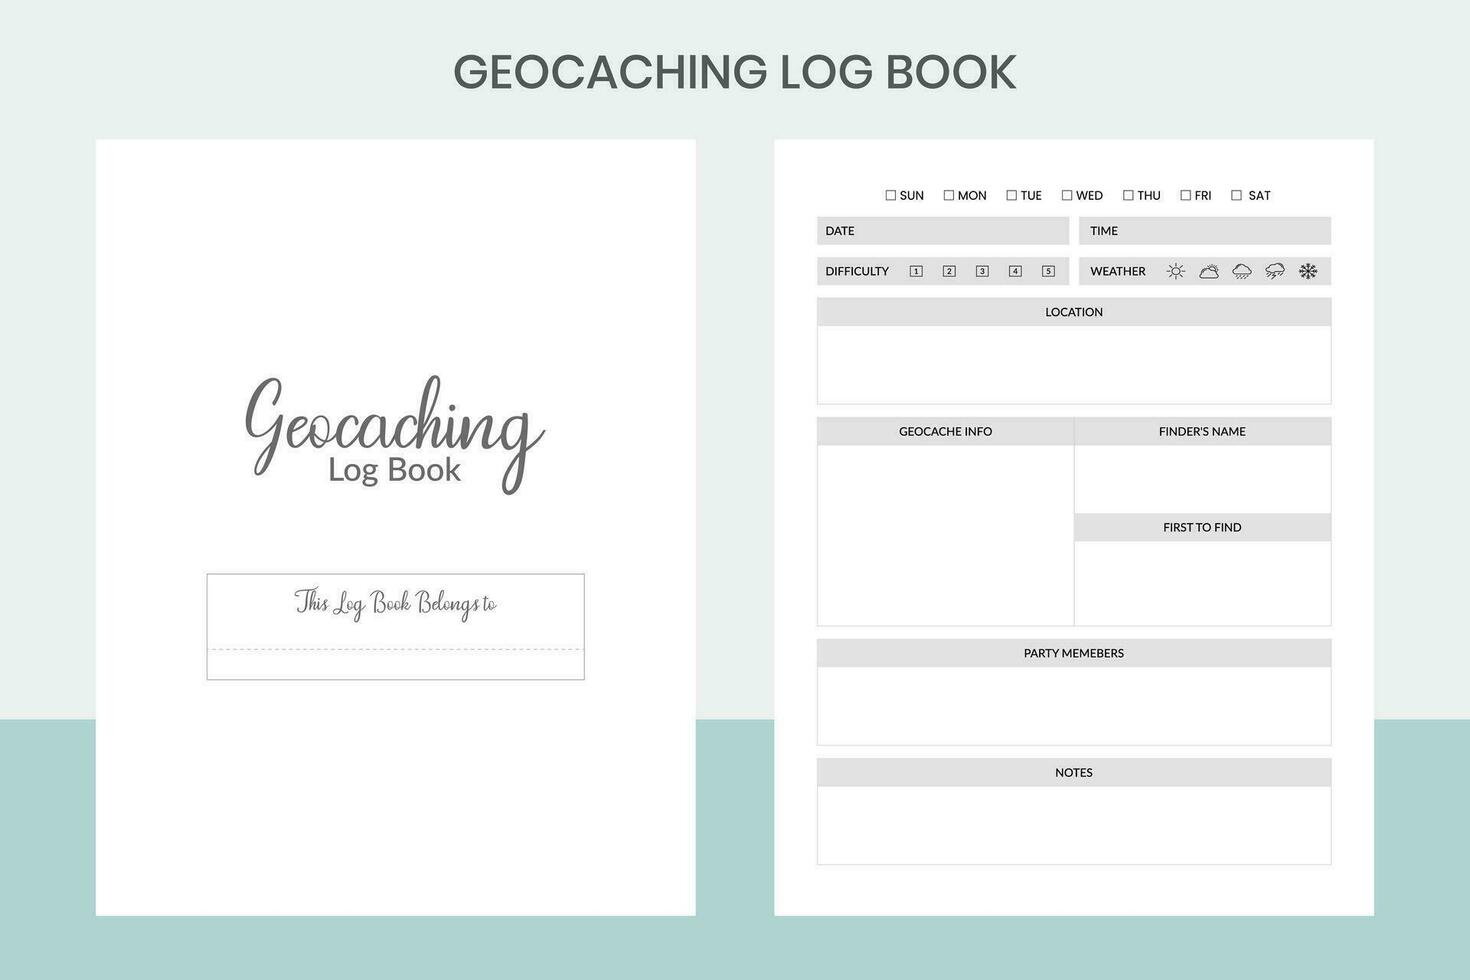 Geocaching Log Book Pro Template vector